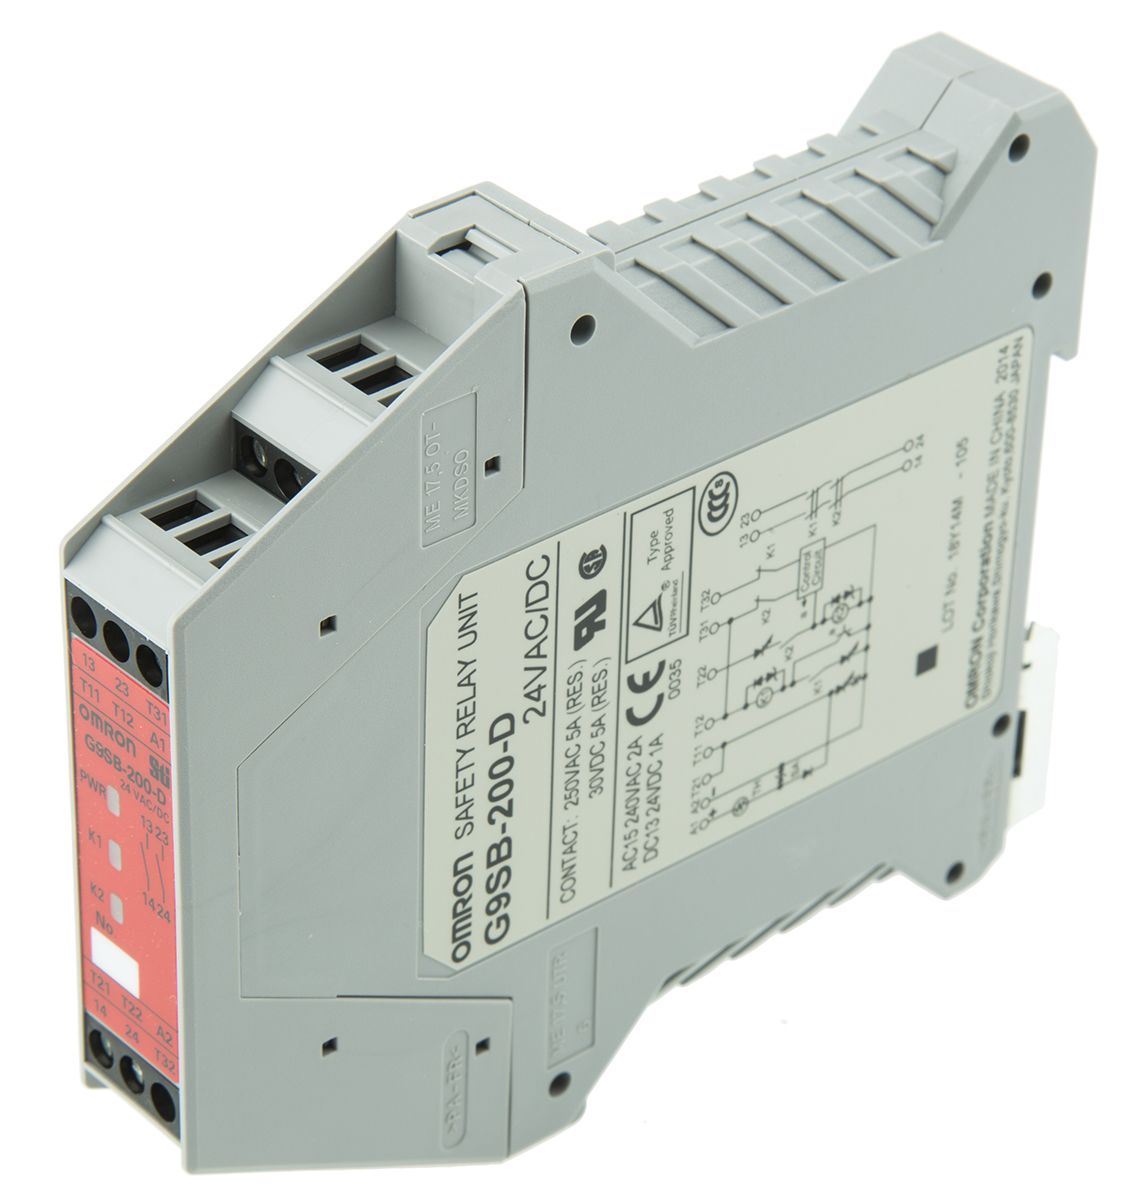 Omron G9SB Series Dual-Channel Emergency Stop Safety Relay, 24V ac/dc, 2 Safety Contact(s)